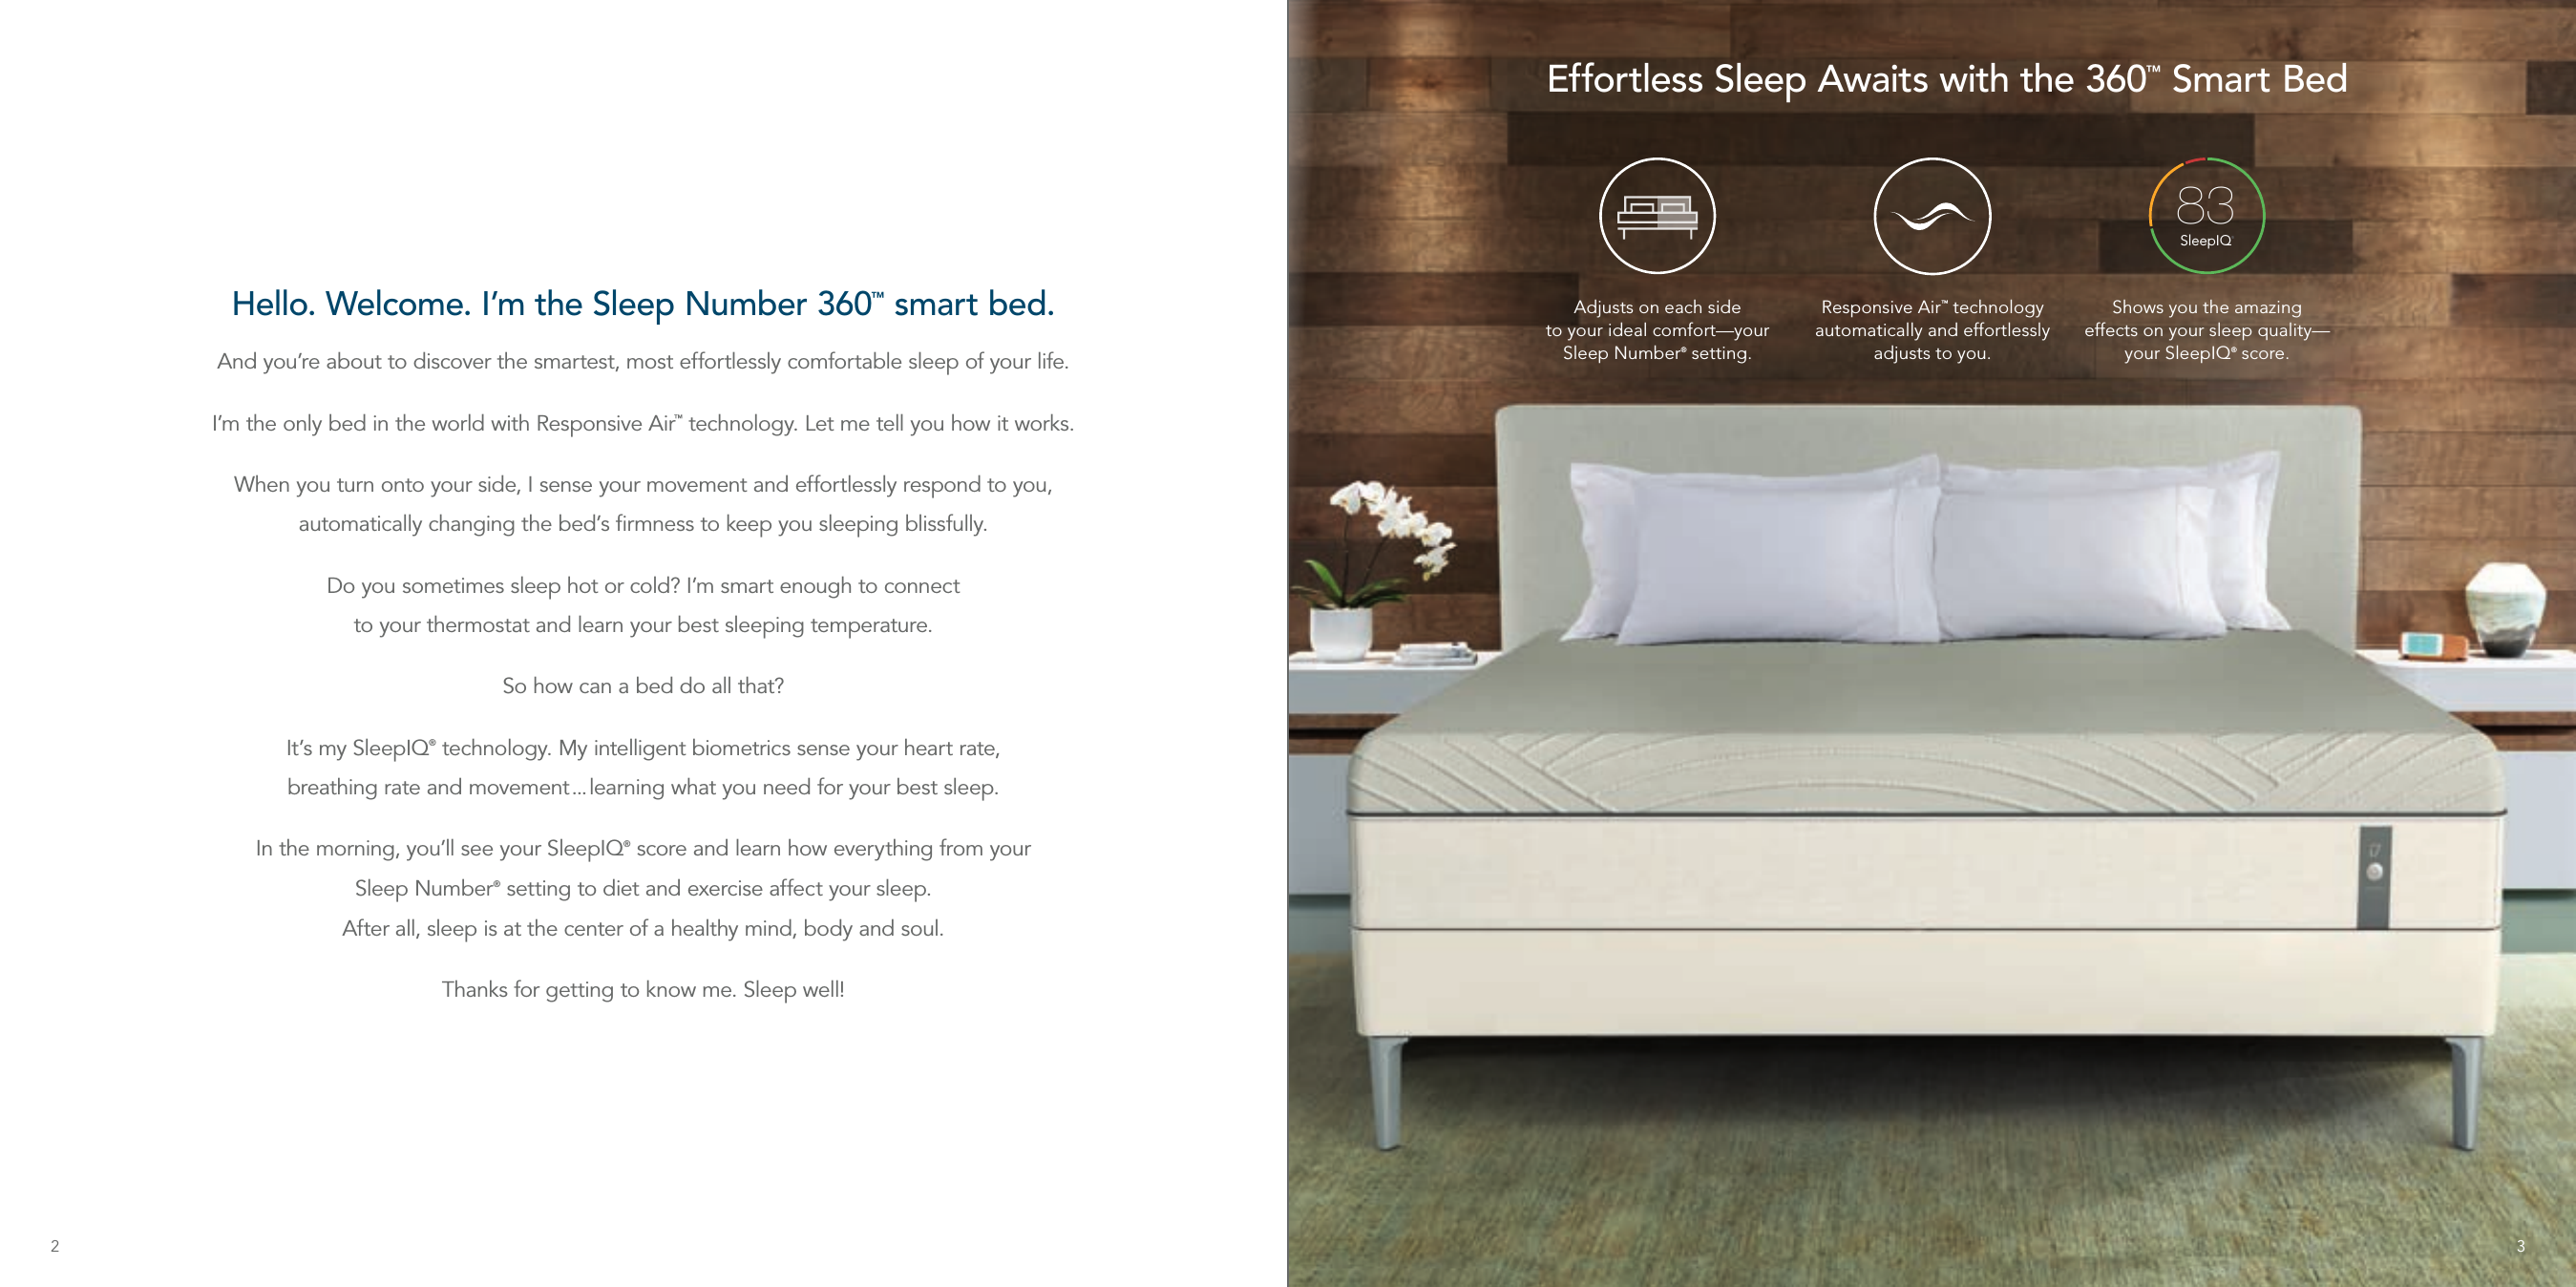 Hello. Welcome. I’m the Sleep Number 360™ smart bed.And you’re about to discover the smartest, most effortlessly comfortable sleep of your life.I’m the only bed in the world with Responsive Air™ technology. Let me tell you how it works.When you turn onto your side, I sense your movement and effortlessly respond to you,  automatically changing the bed’s ﬁrmness to keep you sleeping blissfully.Do you sometimes sleep hot or cold? I’m smart enough to connect  to your thermostat and learn your best sleeping temperature. So how can a bed do all that? It’s my SleepIQ® technology. My intelligent biometrics sense your heart rate,  breathing rate and movement ... learning what you need for your best sleep. In the morning, you’ll see your SleepIQ® score and learn how everything from your  Sleep Number® setting to diet and exercise affect your sleep.  After all, sleep is at the center of a healthy mind, body and soul.Thanks for getting to know me. Sleep well!Effortless Sleep Awaits with the 360™ Smart BedResponsive Air™ technology automatically and effortlessly adjusts to you.Adjusts on each side to your ideal comfort—yourSleep Number® setting. 83SleepIQ®Shows you the amazing effects on your sleep quality—your SleepIQ® score.23